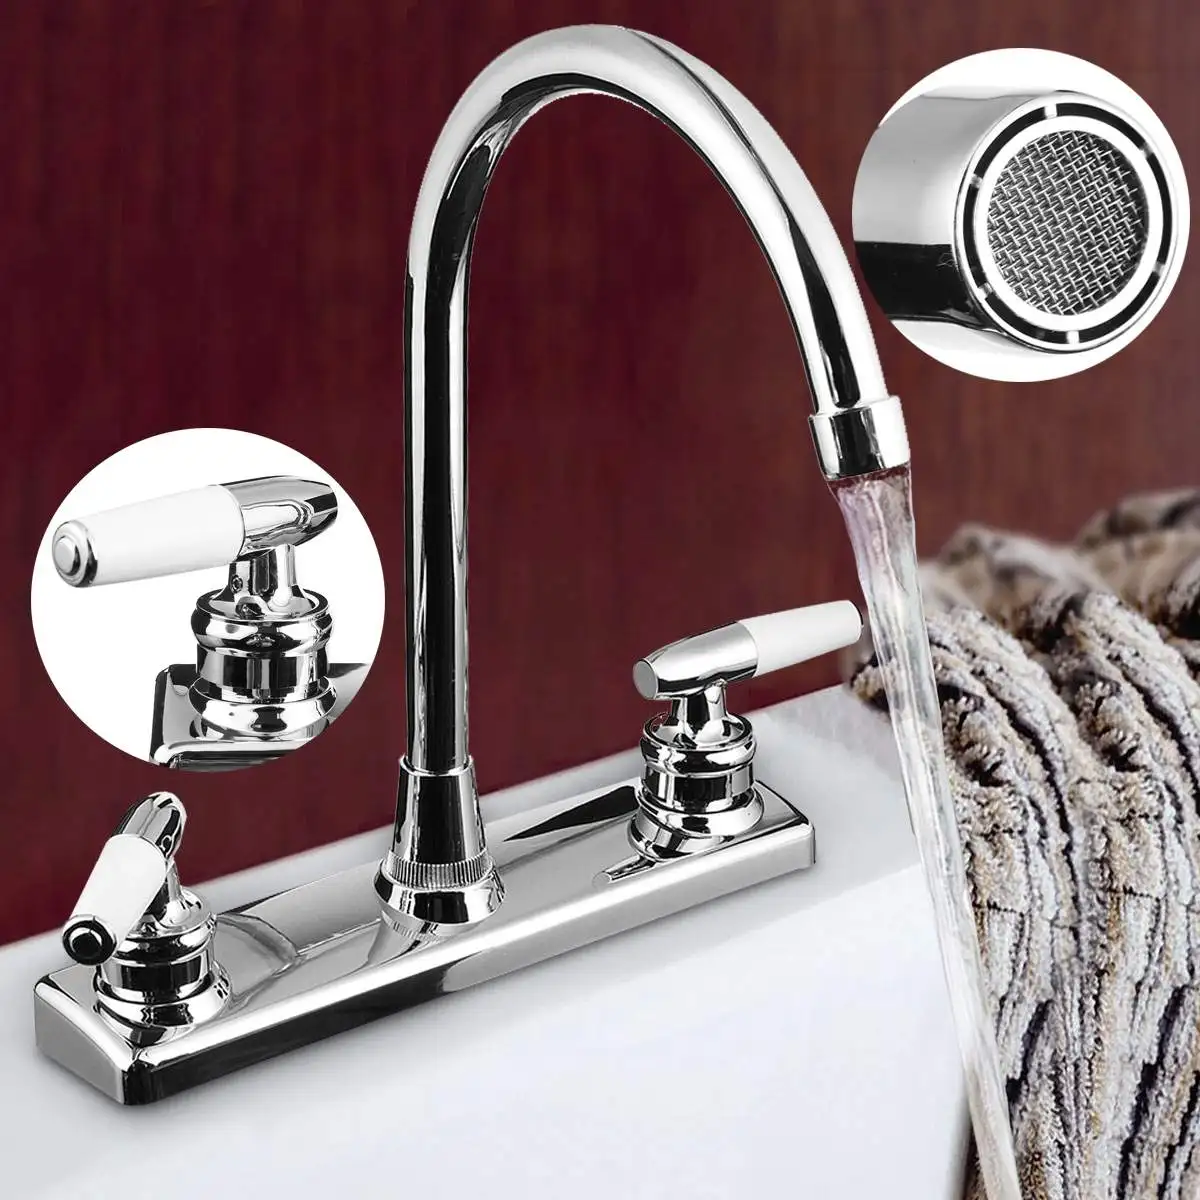 

BVSOIVIA Double Handle Double Basin Kitchen Faucet Tap Silver Single Hole Water Tap Torneira Cozinha Cold And Hot Mixer Tap US